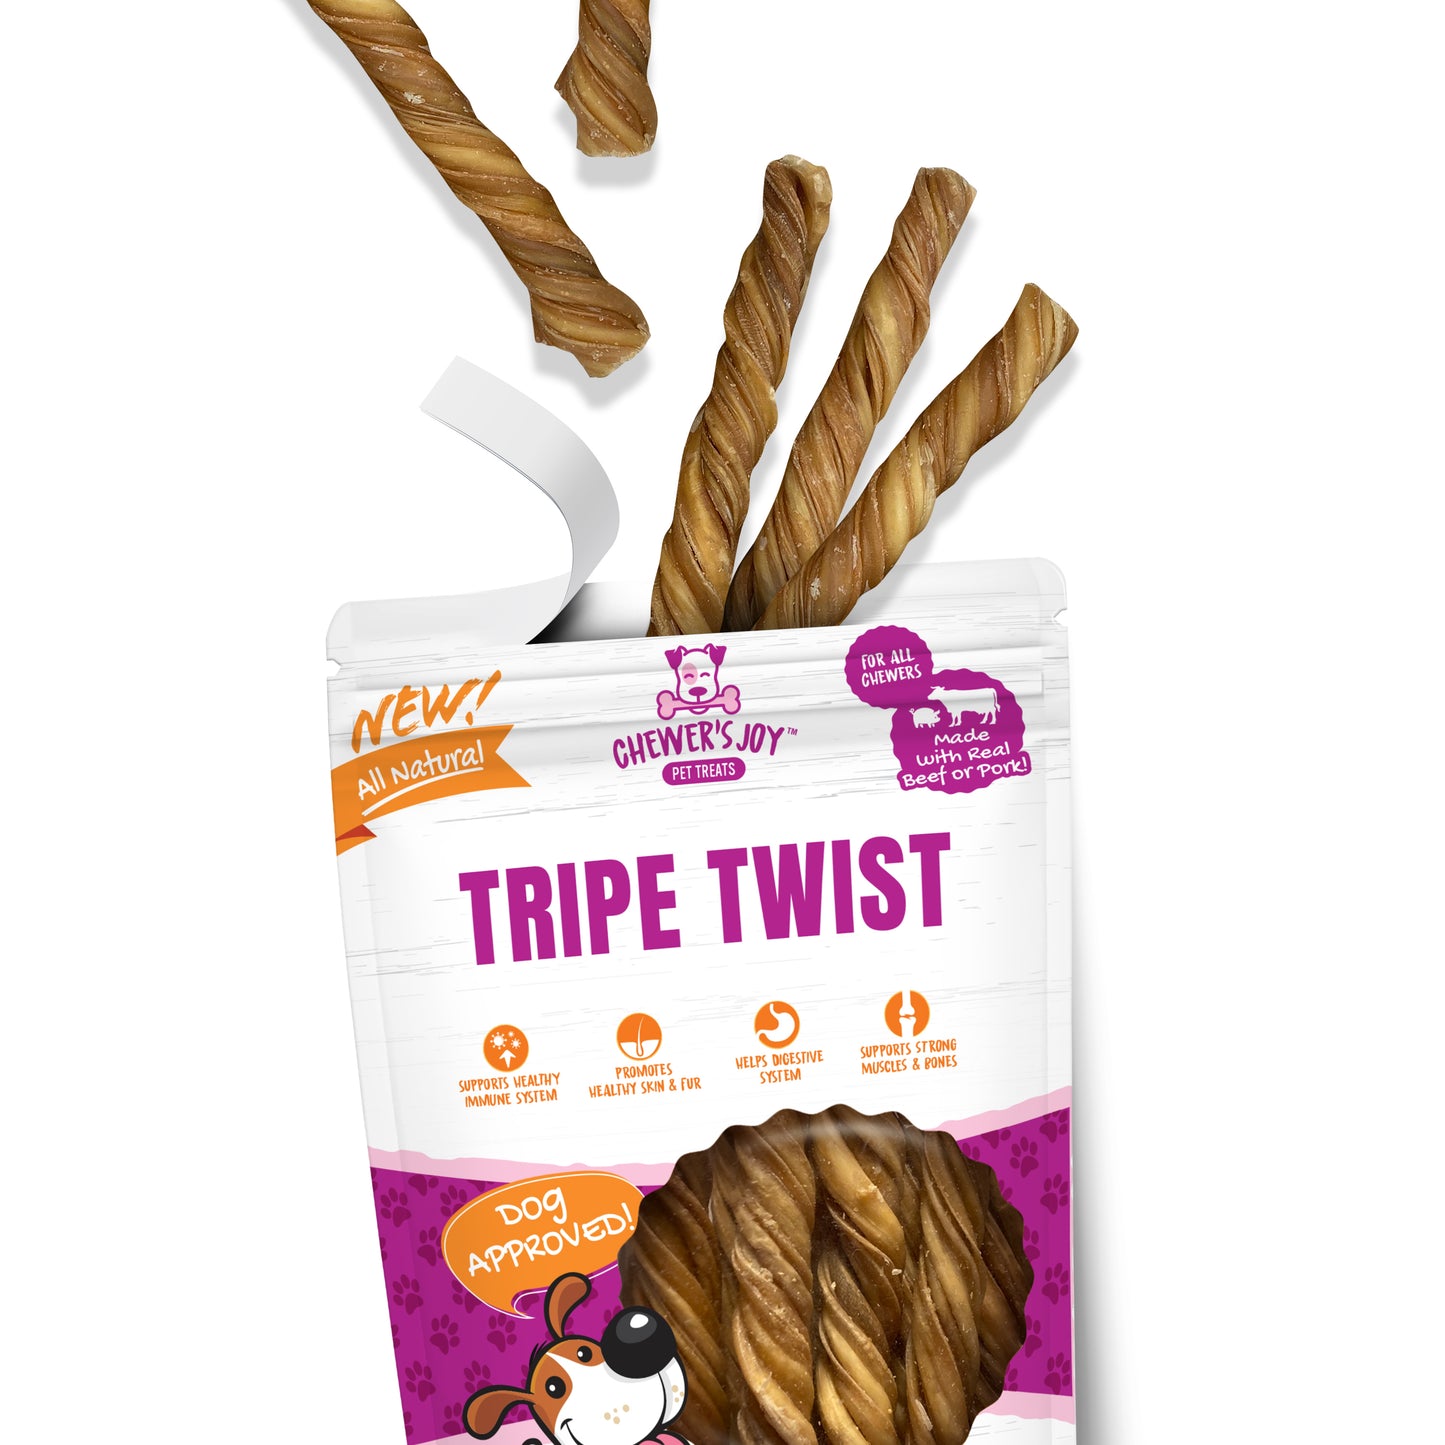 Chewer's Joy Tripe Twist 15pk 6-7" Dog Treats, High in Protein for Strong Muscles and Bones, Minerals Like Iron and Zinc to Help Boost Immune System.…